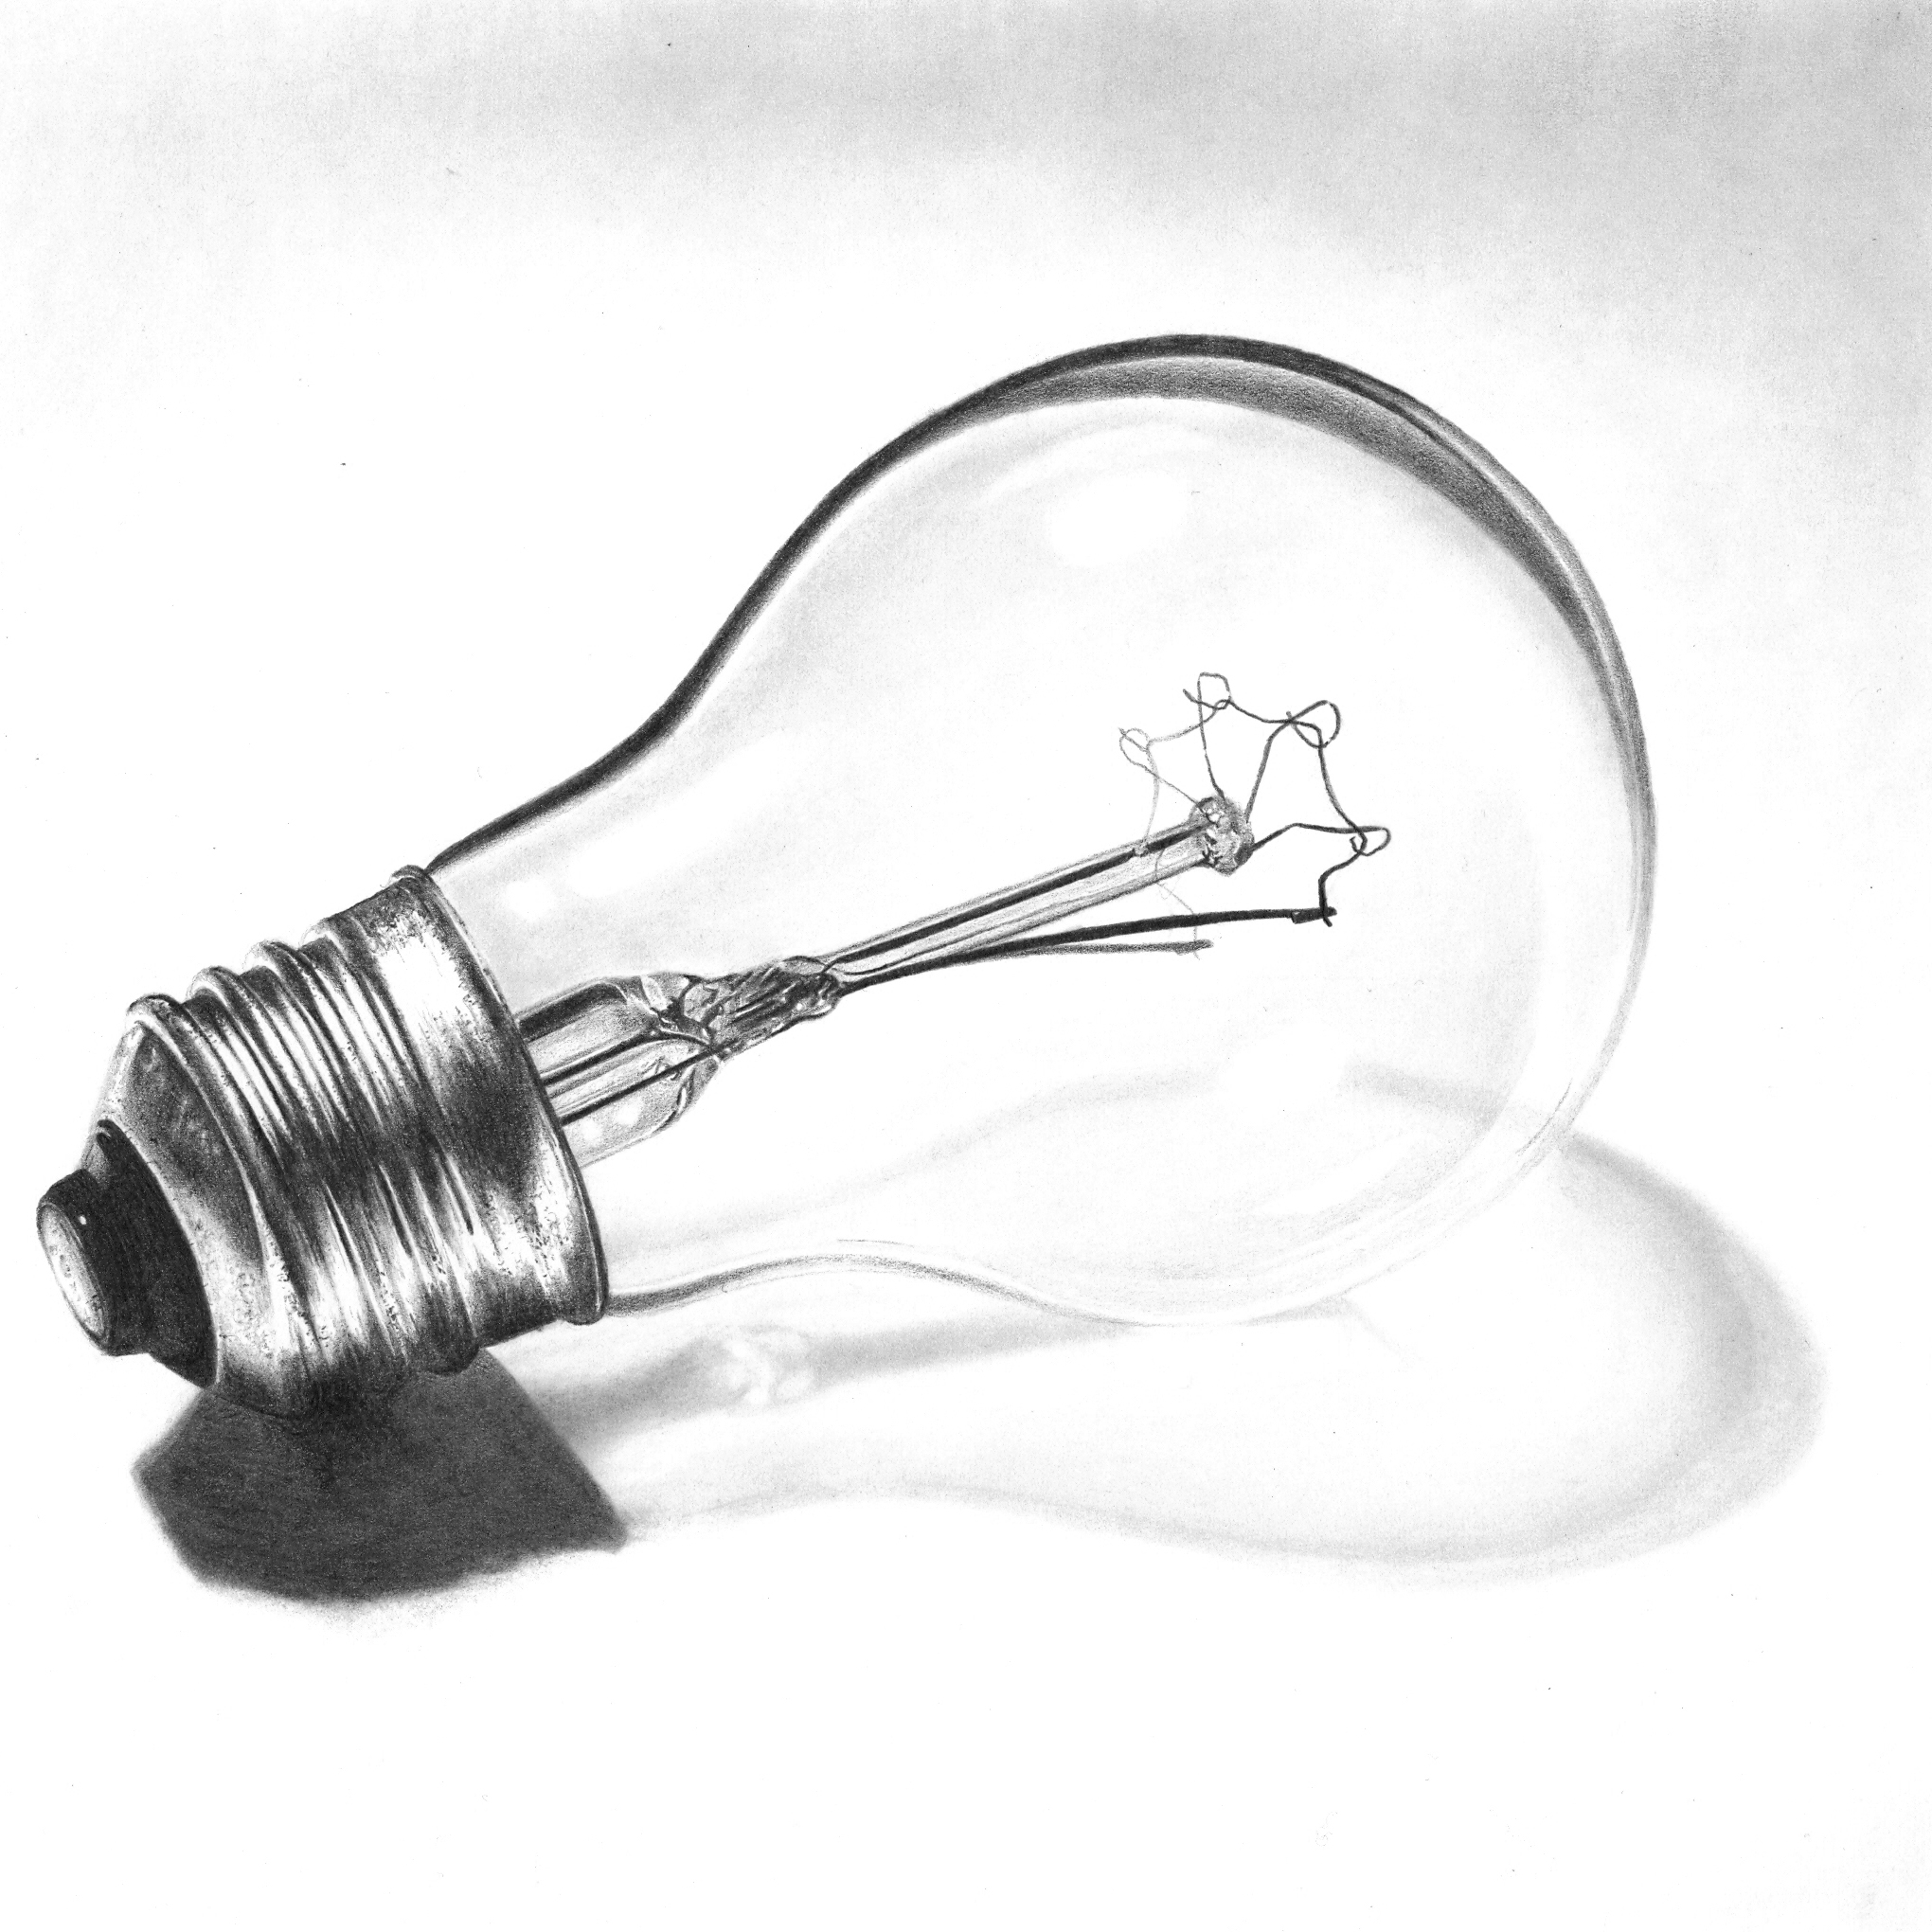 Free Light Bulb Drawing, Download Free Light Bulb Drawing png images